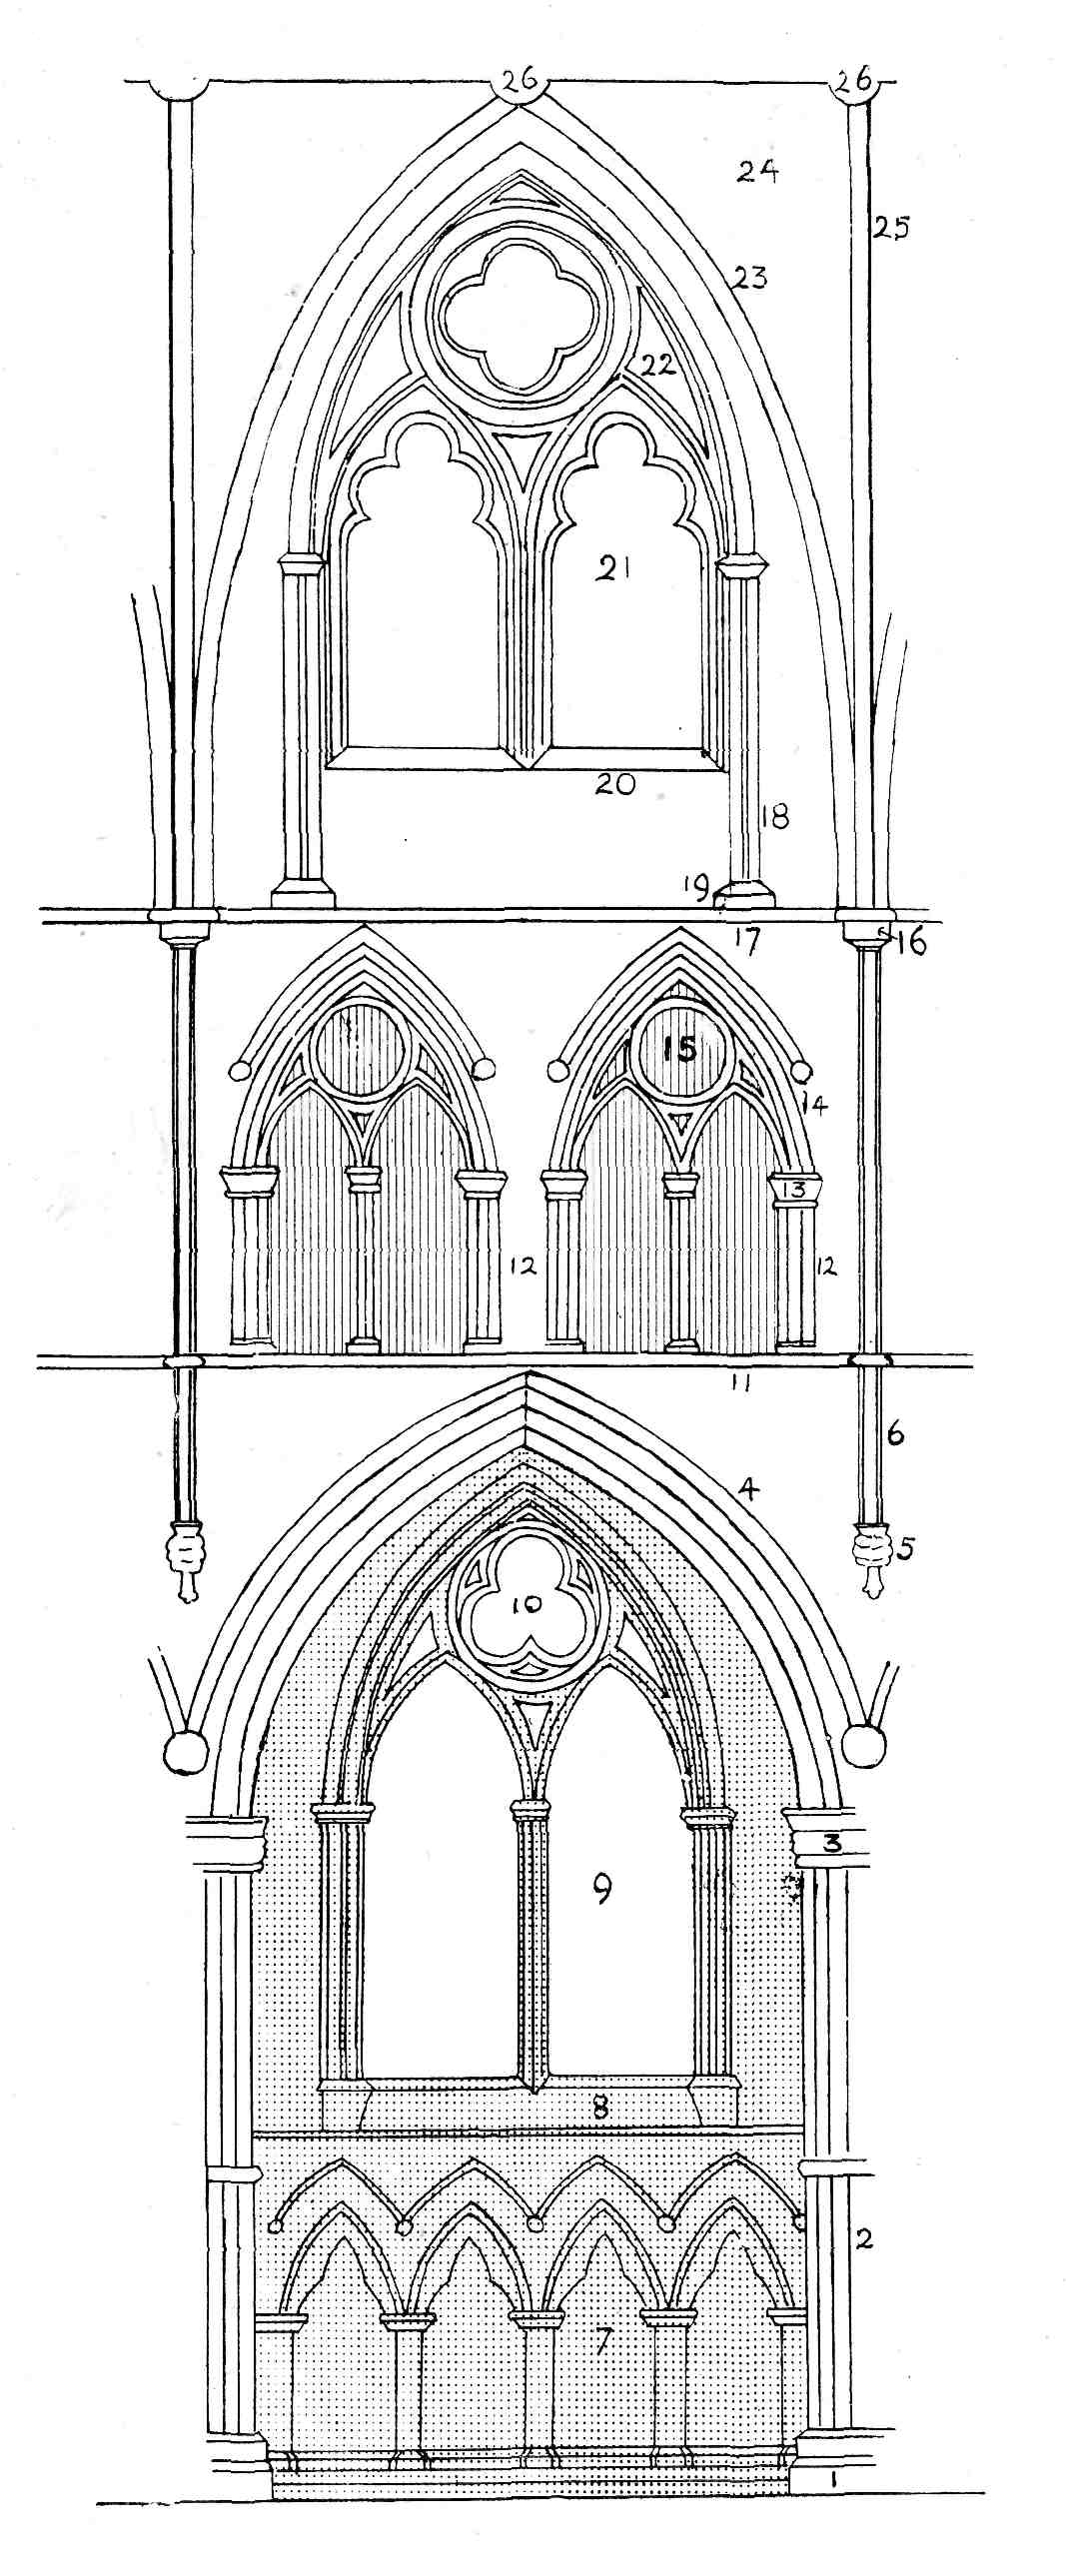 Interior Elevation of a Bay of a Church.